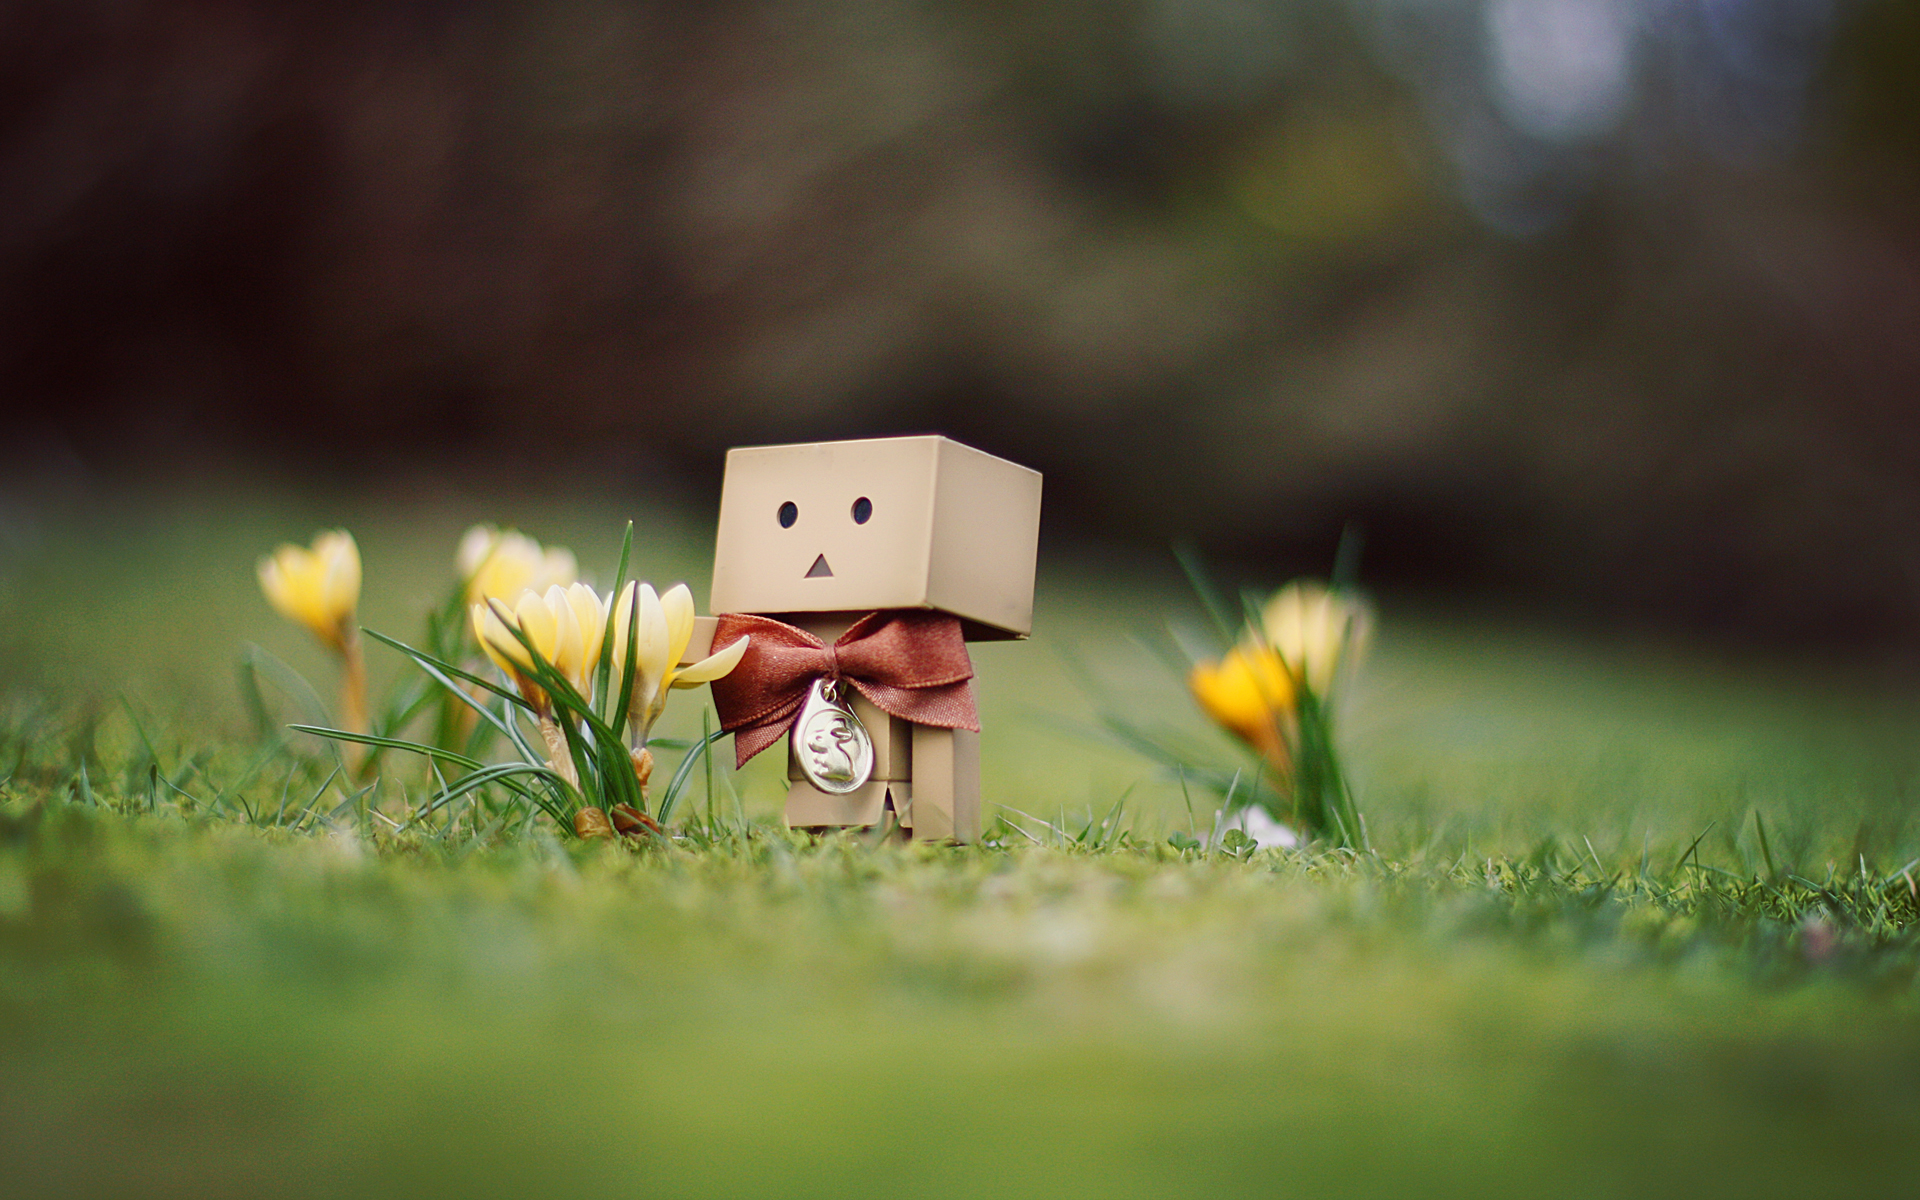 Danbo March Wallpaper. July 21, 2010 brokrek Leave a comment Go to comments